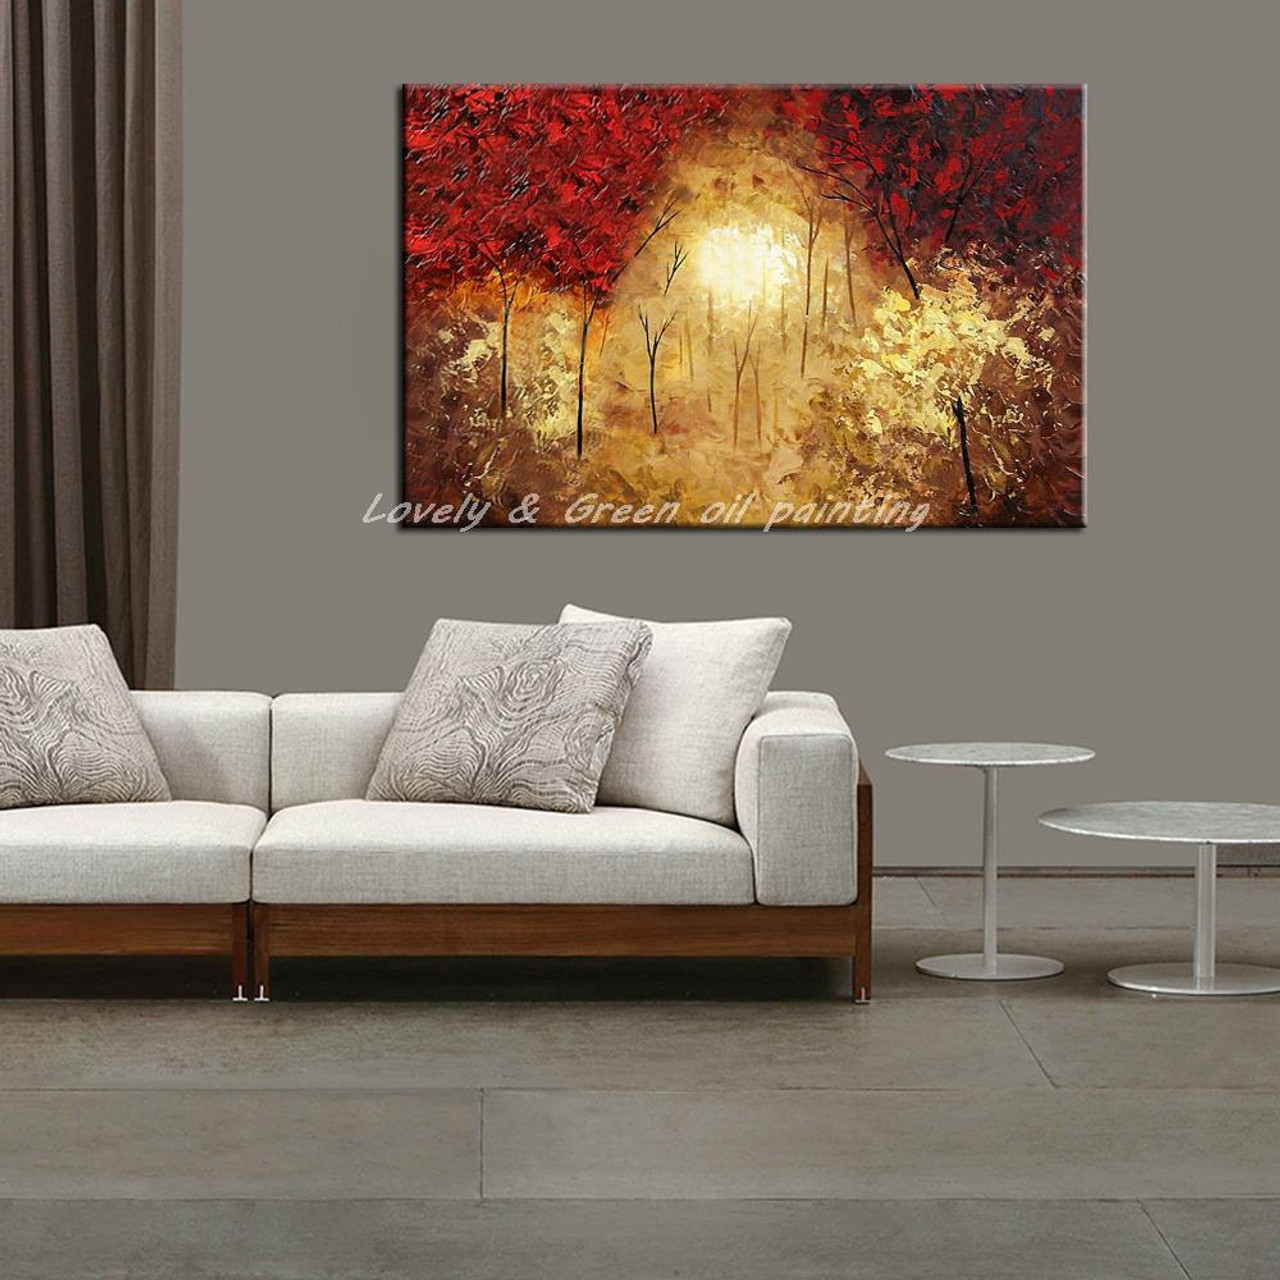 100 Hand Painted Modern Abstract Landscape Tree Oil Painting On Canvas Wall Art For Living Room Home Decoration Picture Gift Onshopdeals Com